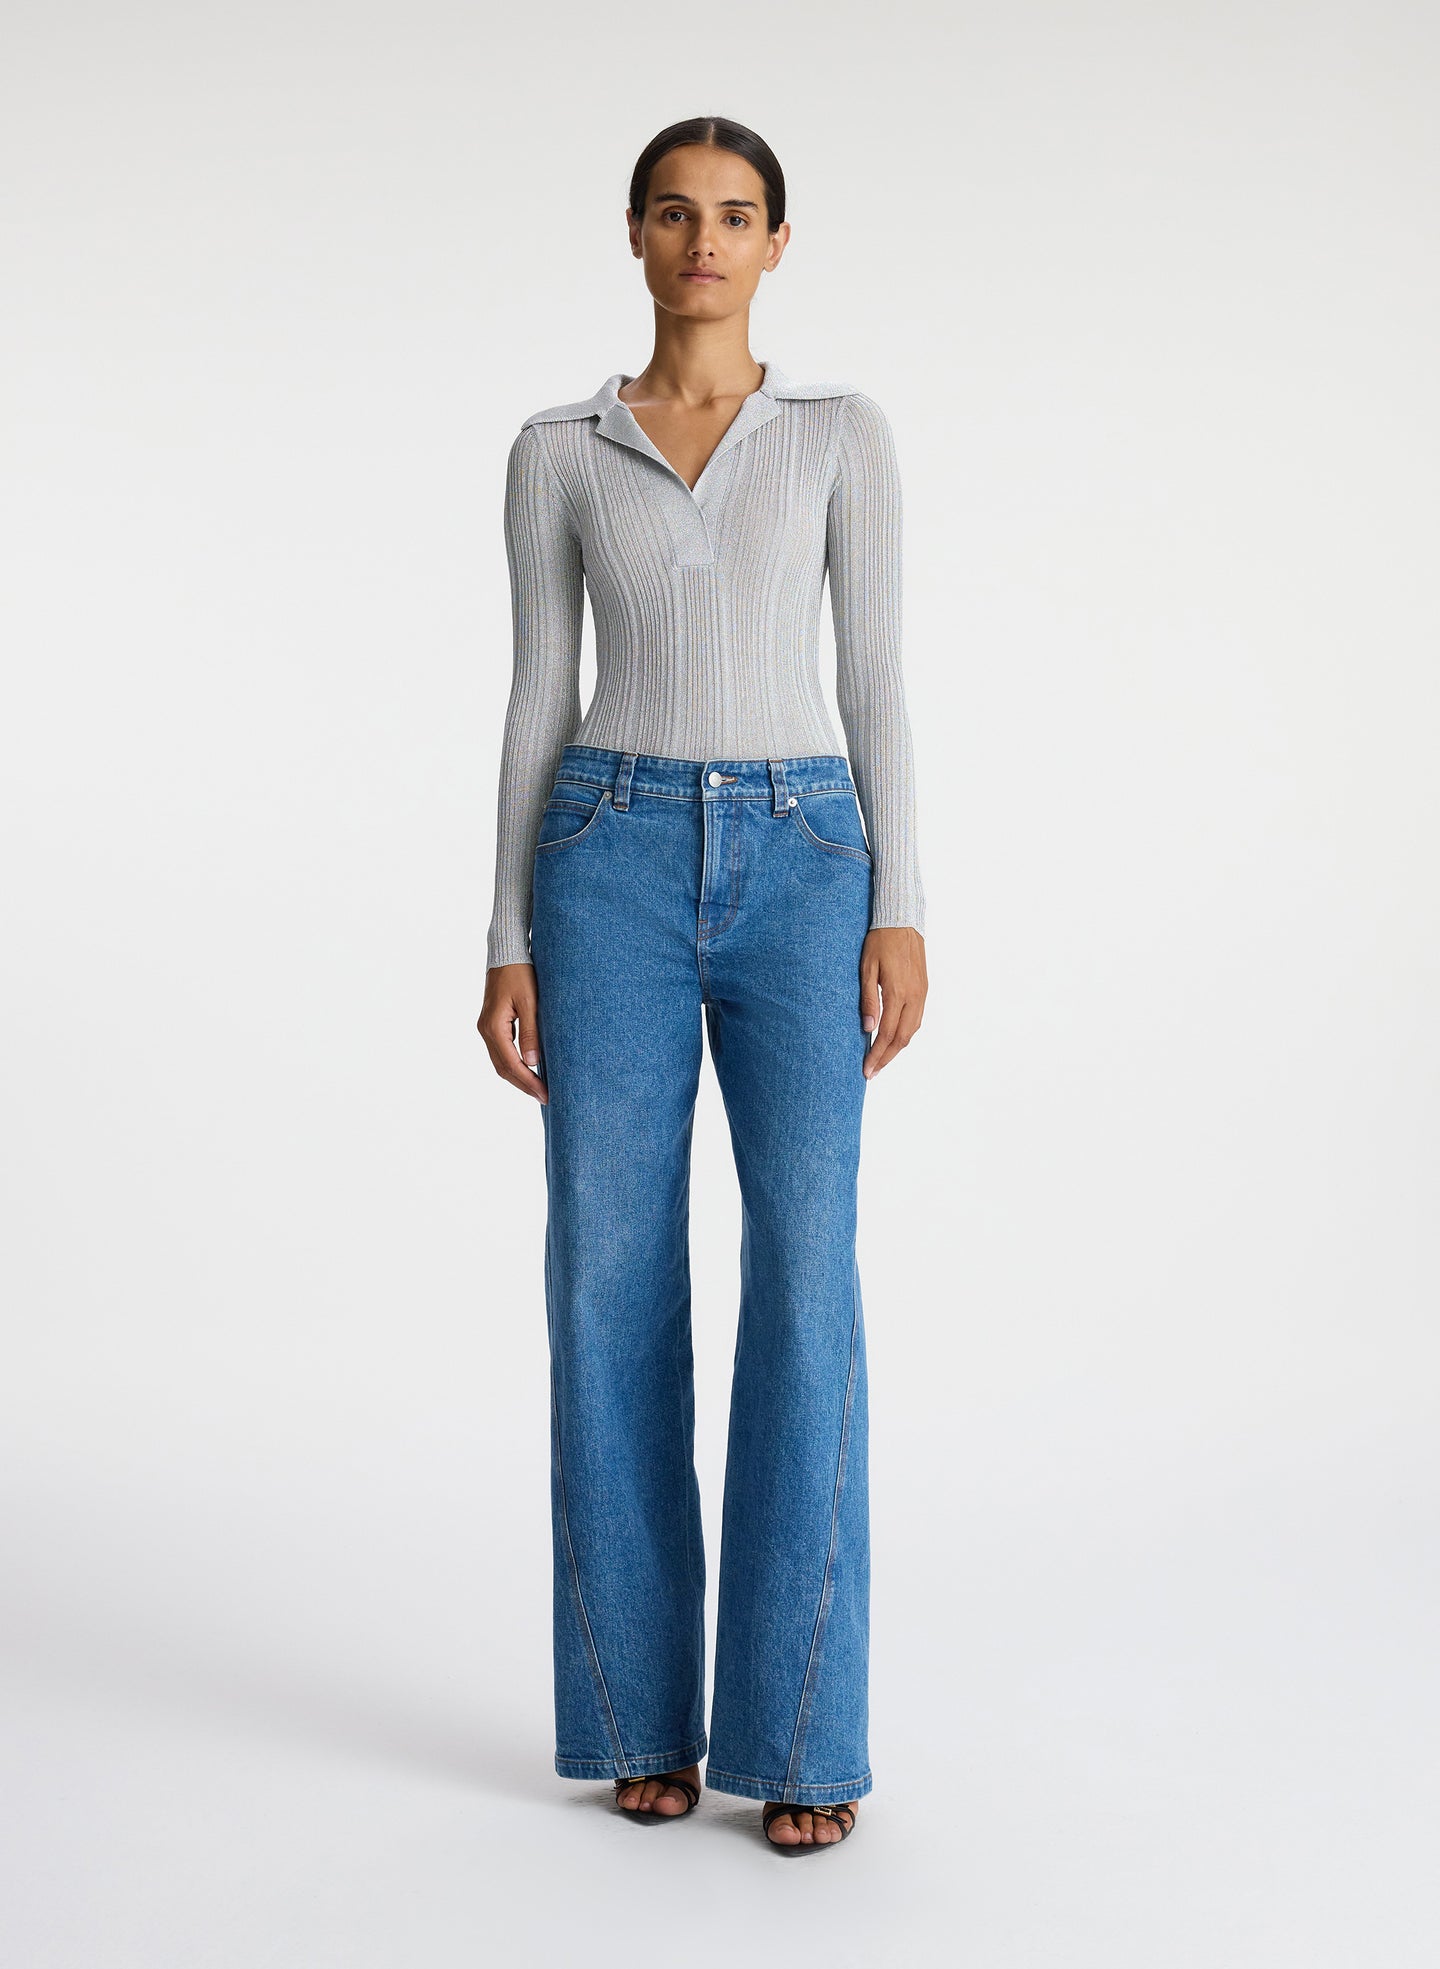 front view of woman in silver long sleeve top and medium blue wash jeans